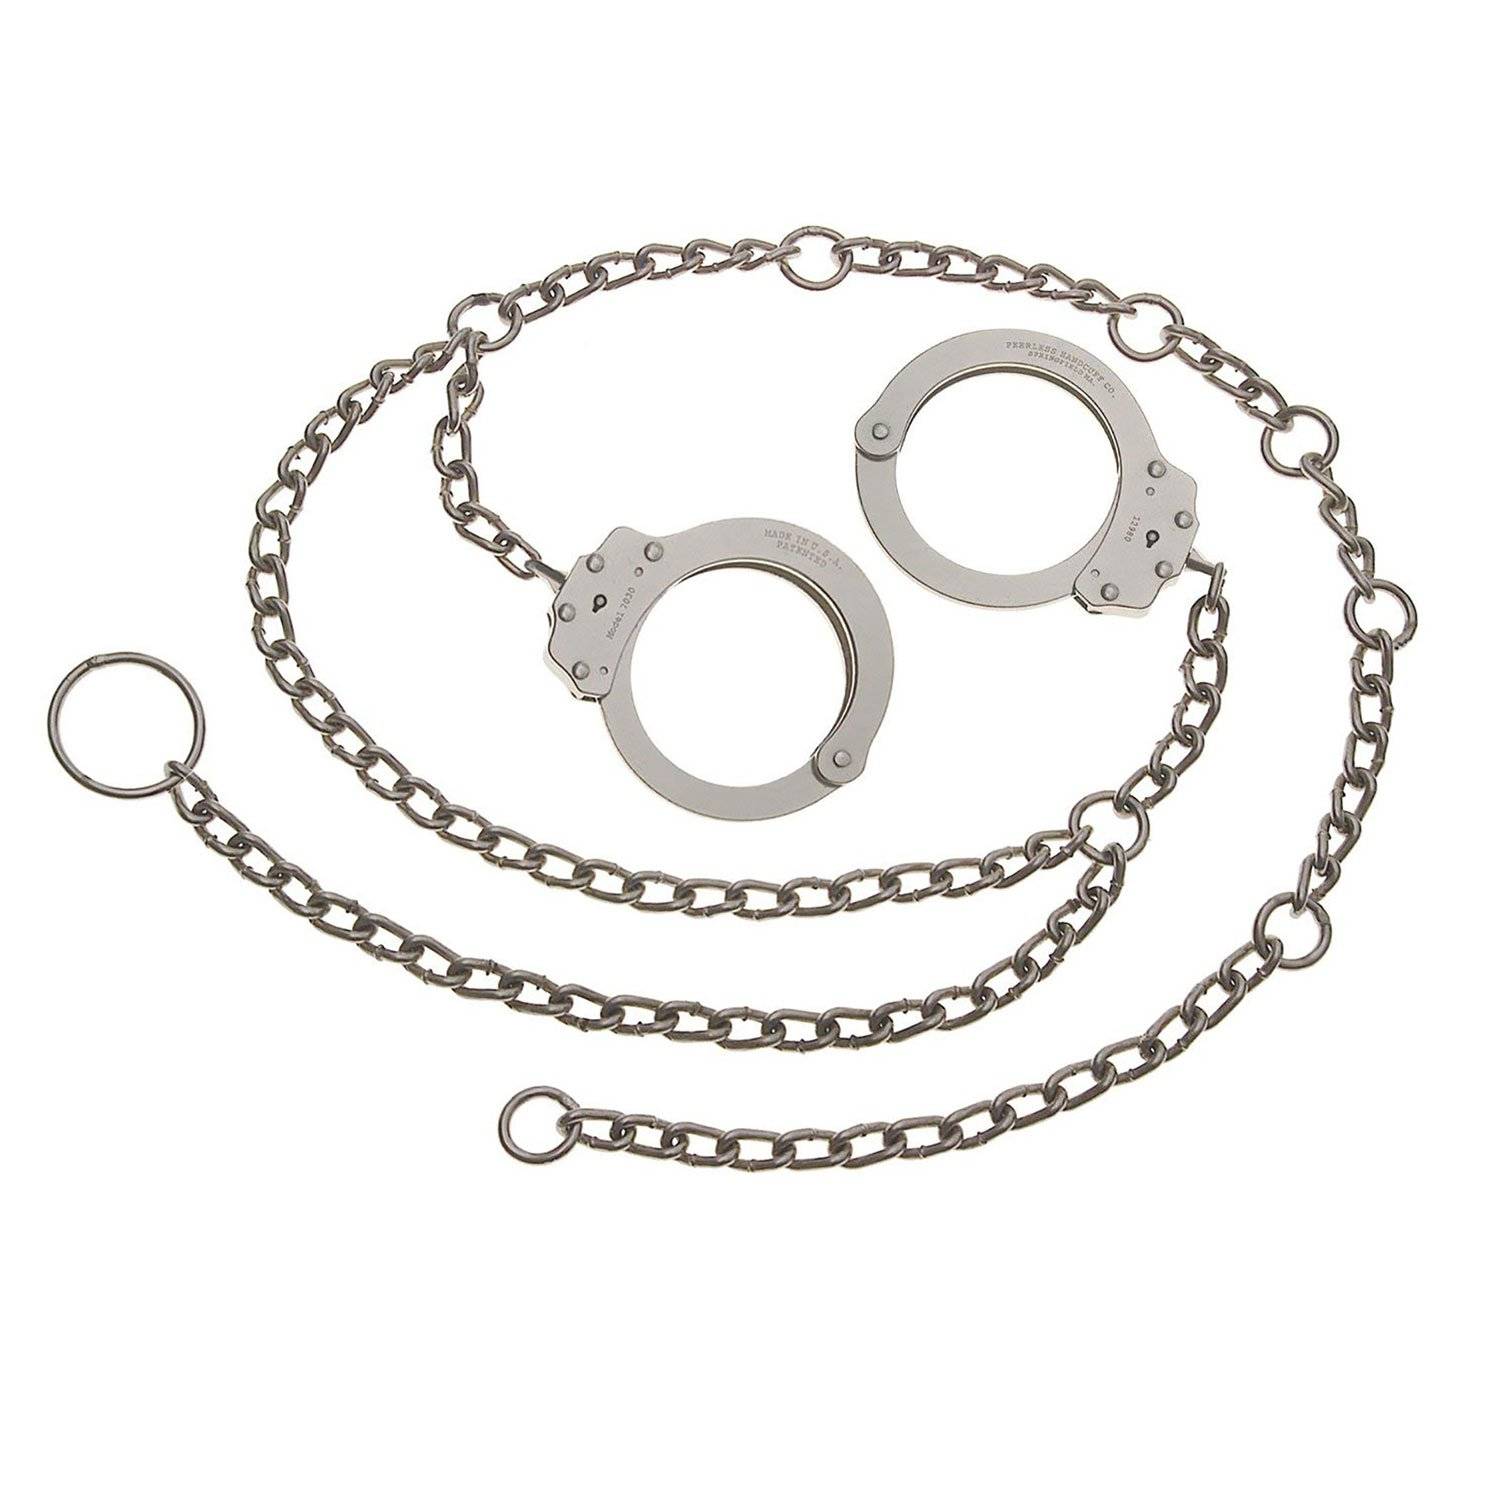 Peerless Handcuff Waist Chain with oversize handcuff connect